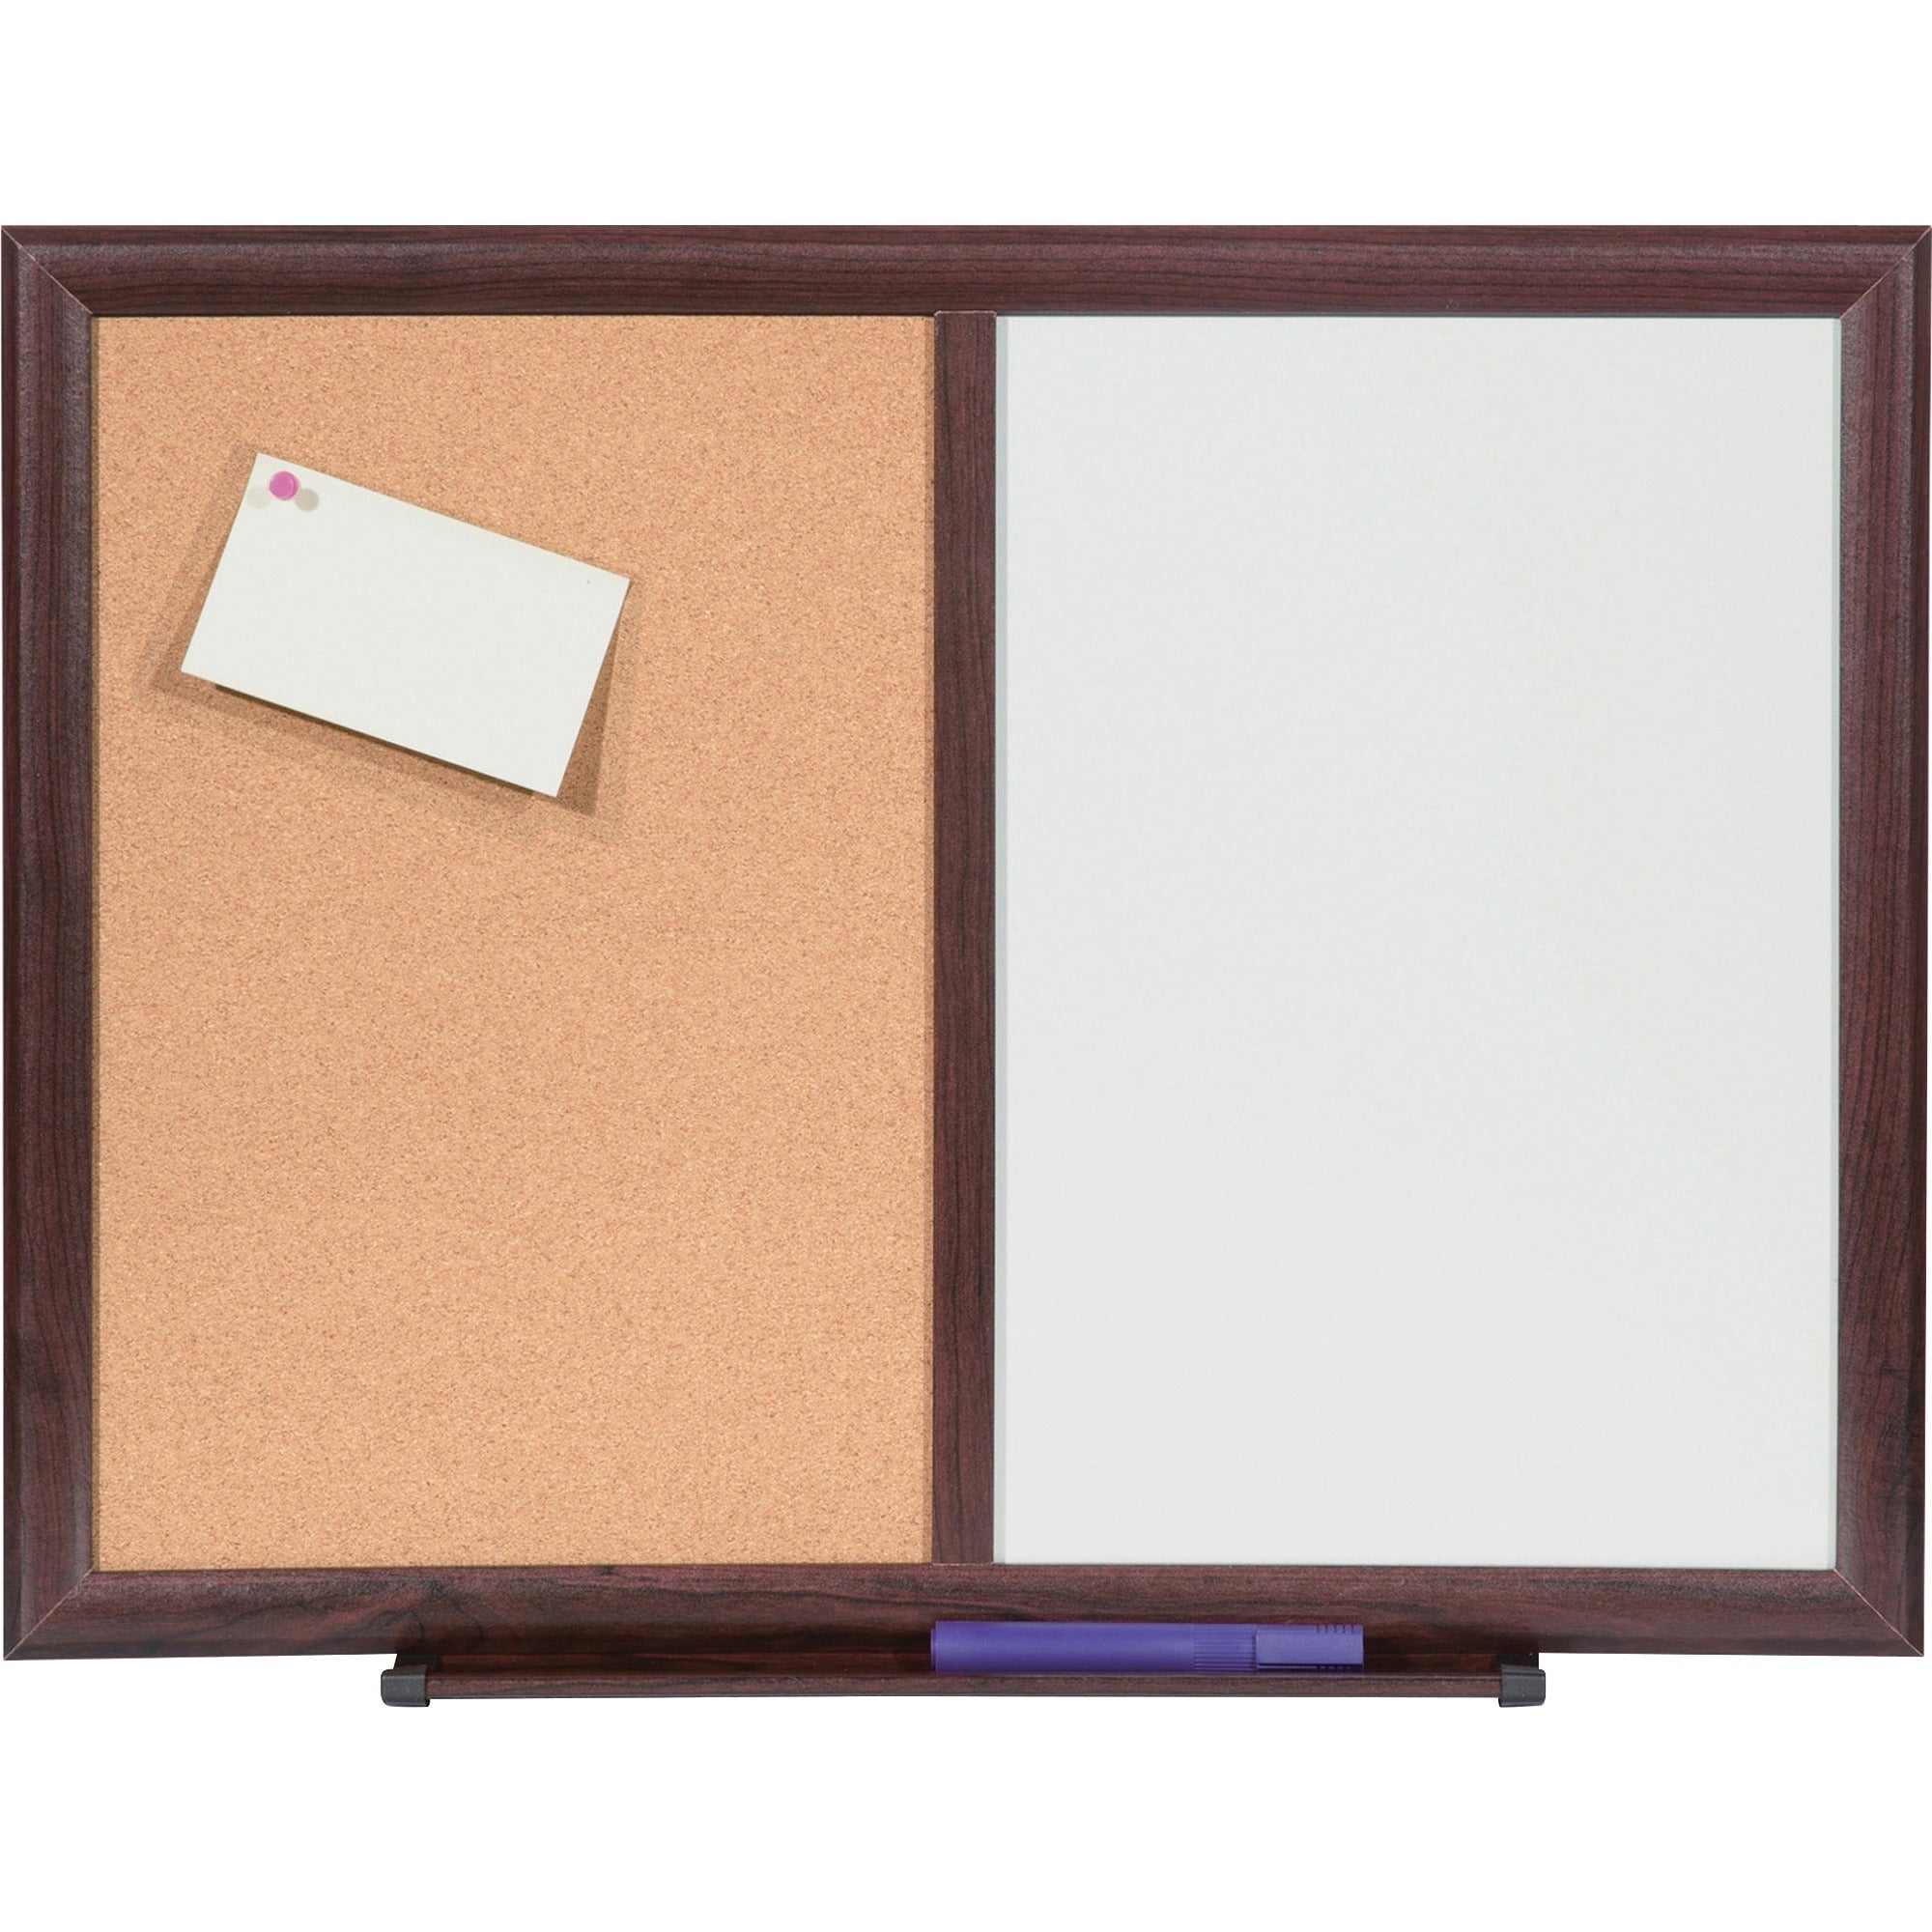 Lorell Combo Dry-Erase/Cork Board - 36" (3 ft) Width x 48" (4 ft) Height - Melamine Surface - Mahogany Wood Frame - 1 Each - 